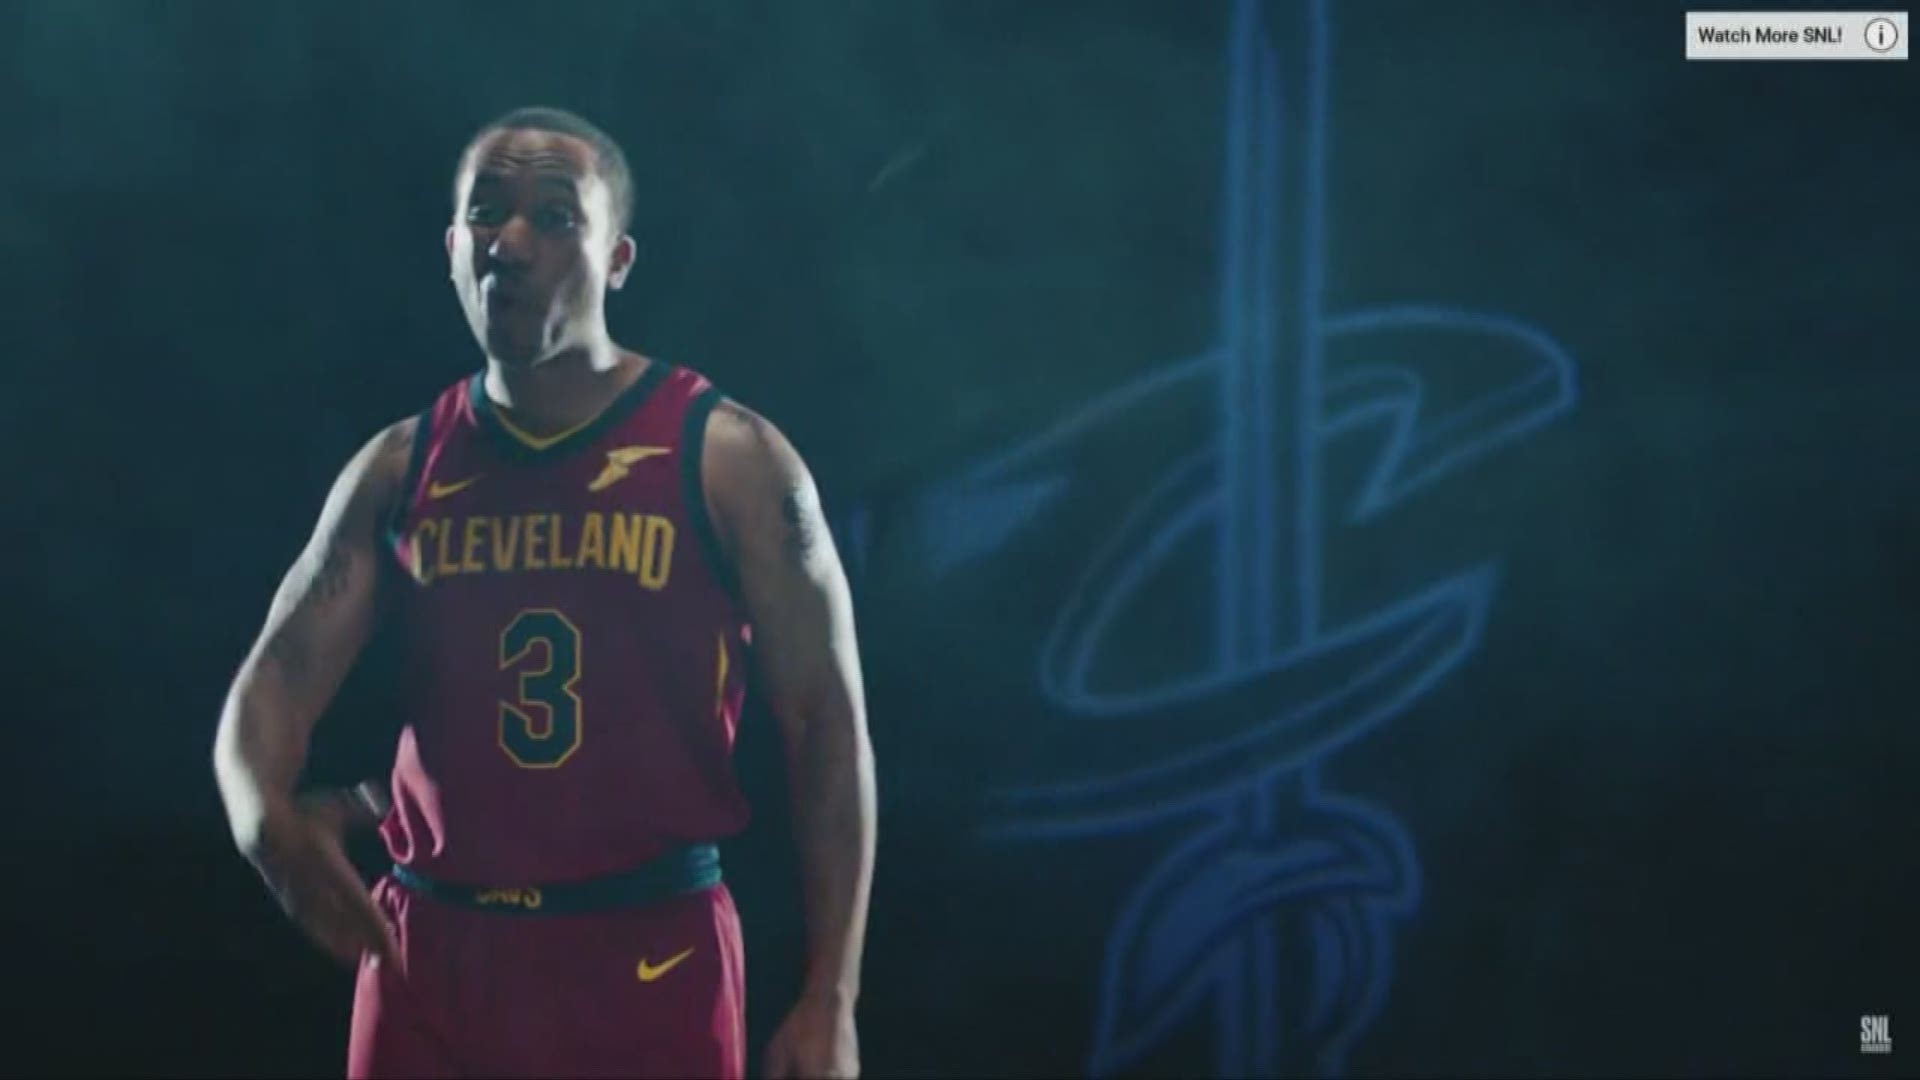 Unaired Saturday Night Live skit highlights Clevelands other Cavaliers wkyc